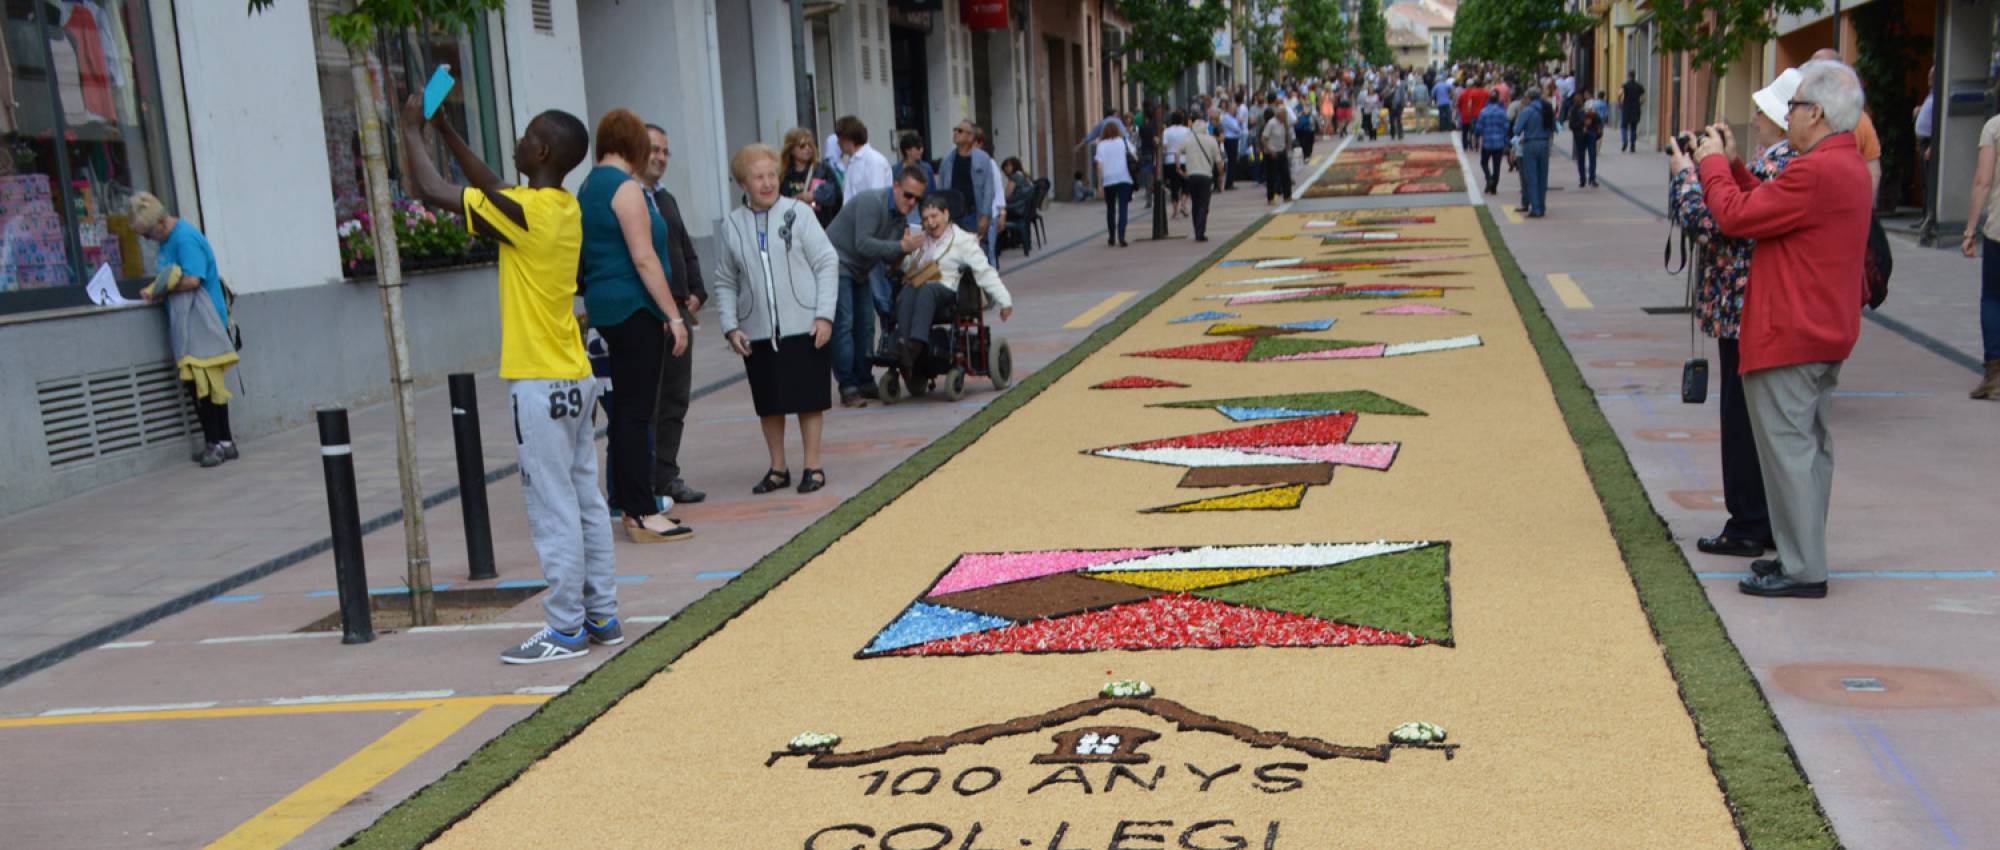 Carpet of flowers on the road made by students and teachers of the Institut Montsoriu in Arbúcies during the Enramades festival in 2016.. CC BY-SA 4.0 - Auledas / wIkimedia Commons